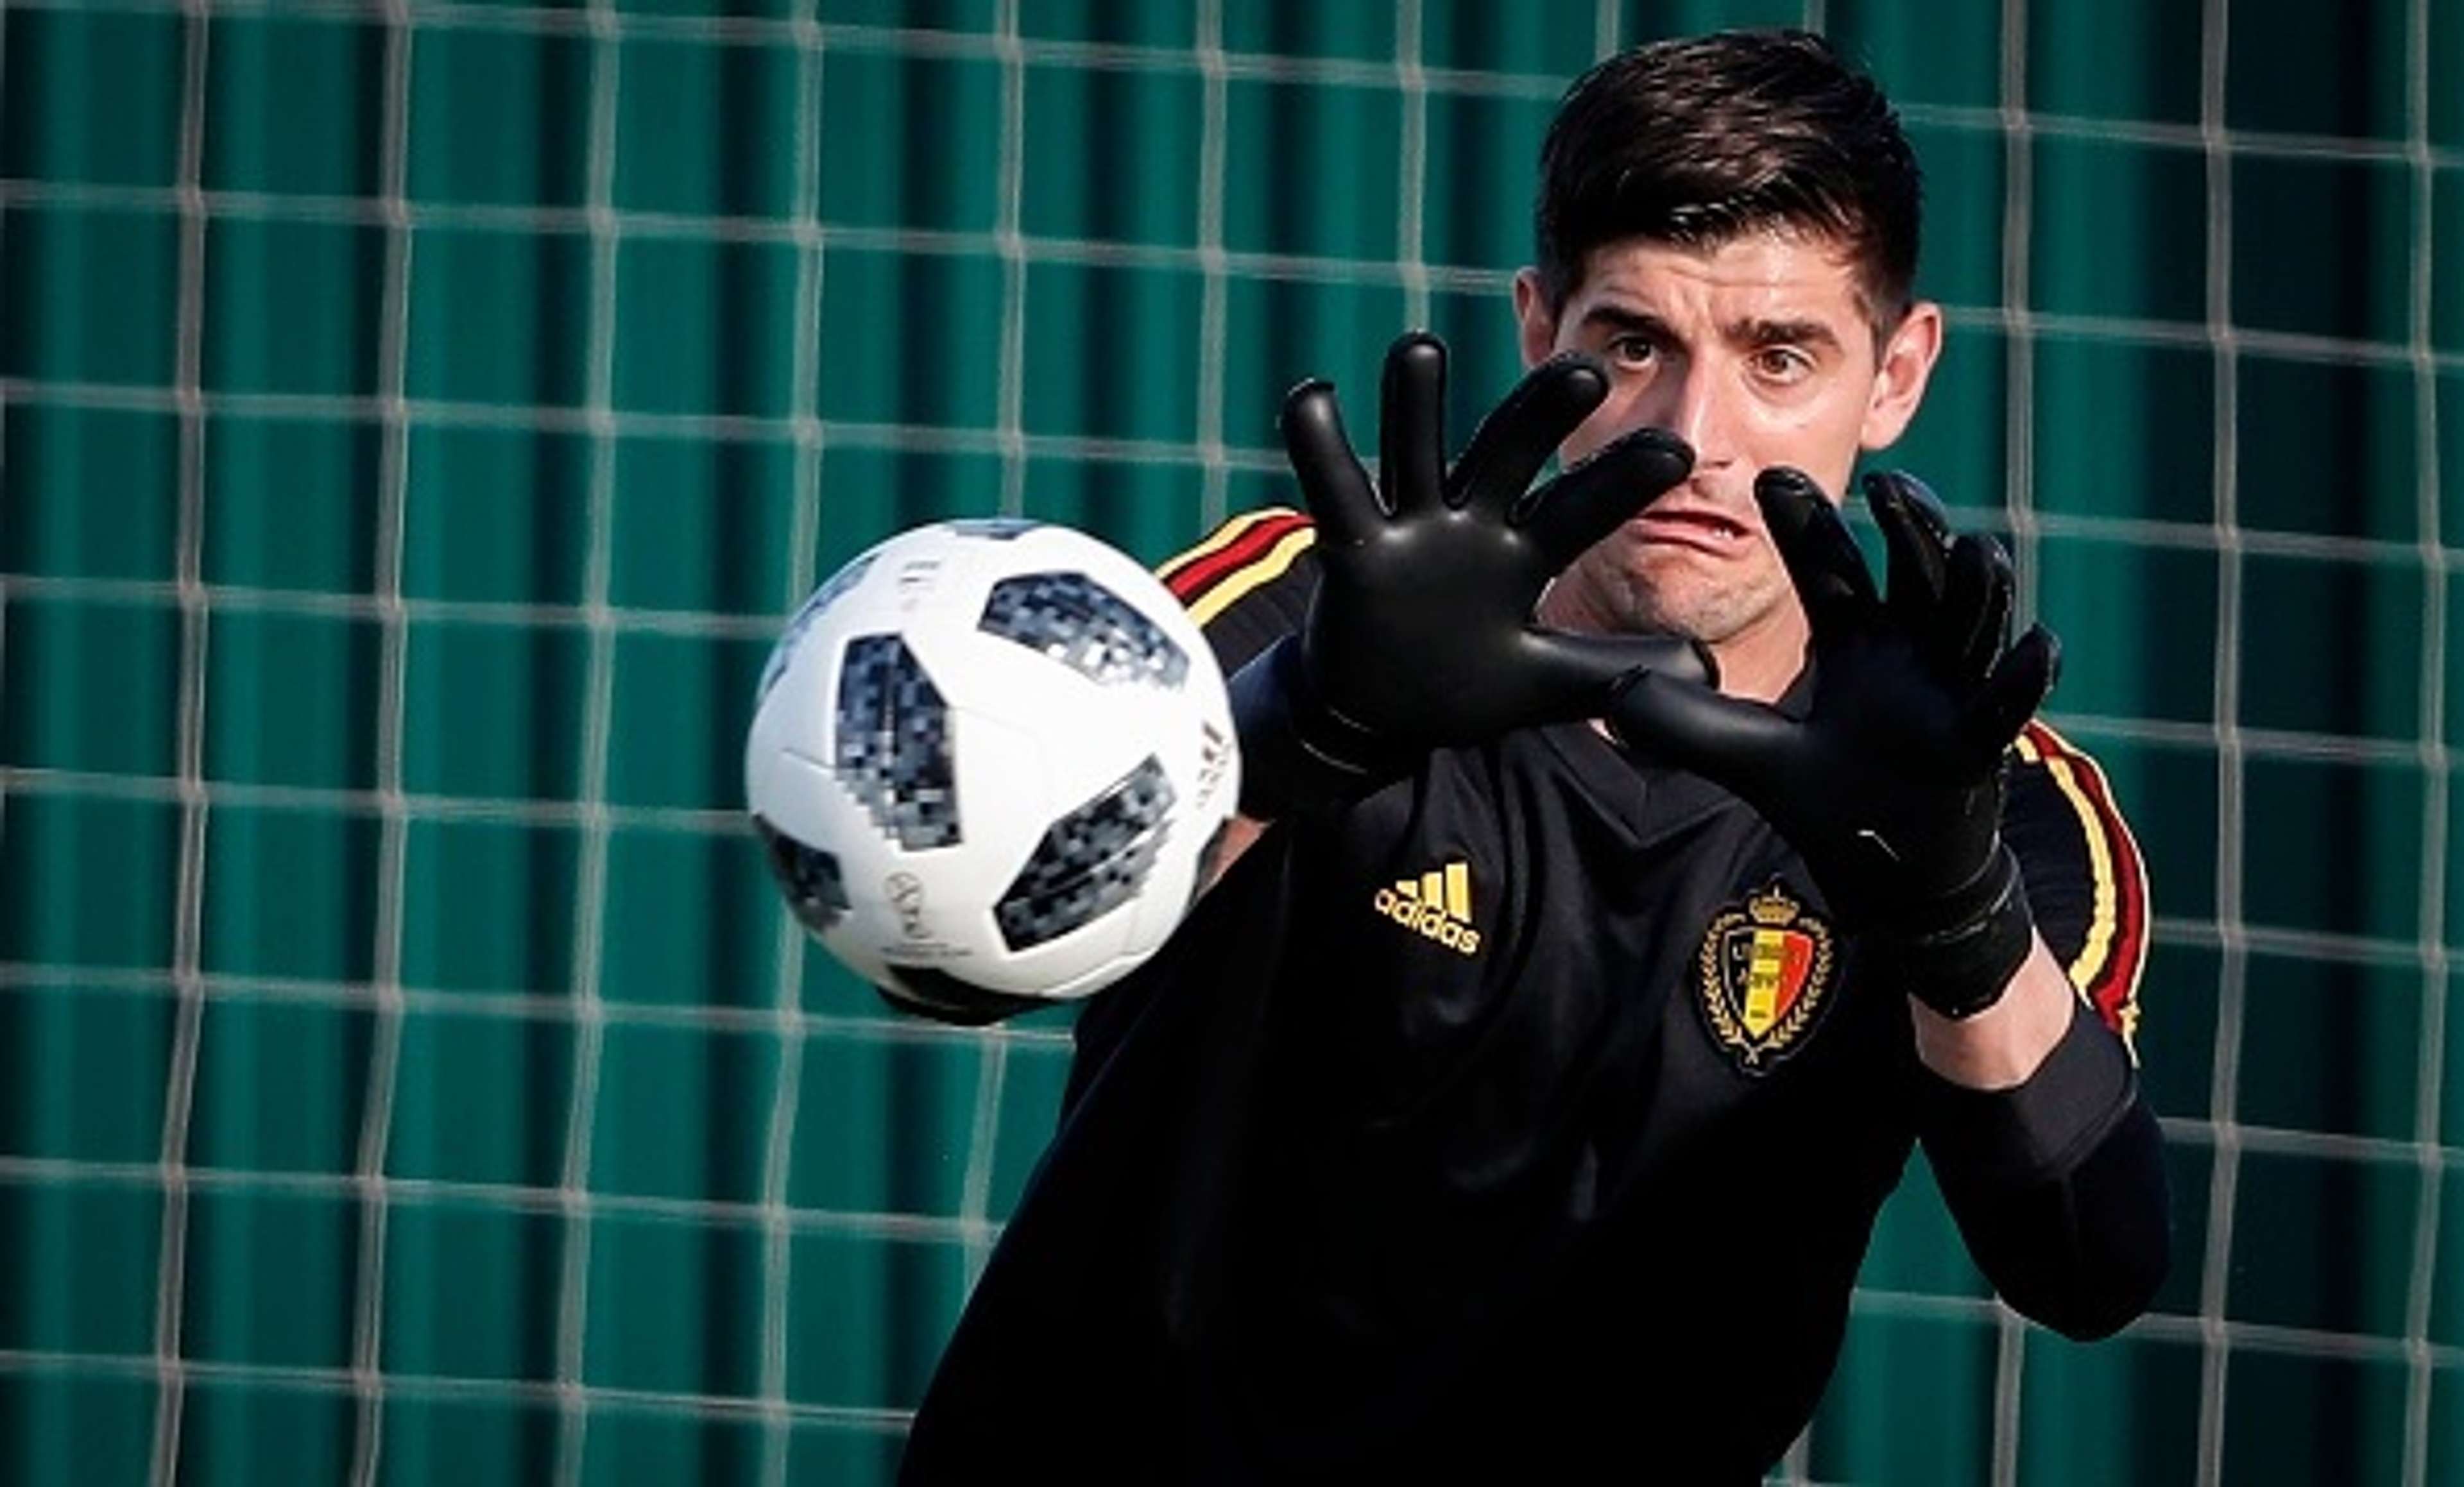 Courtois getting ready